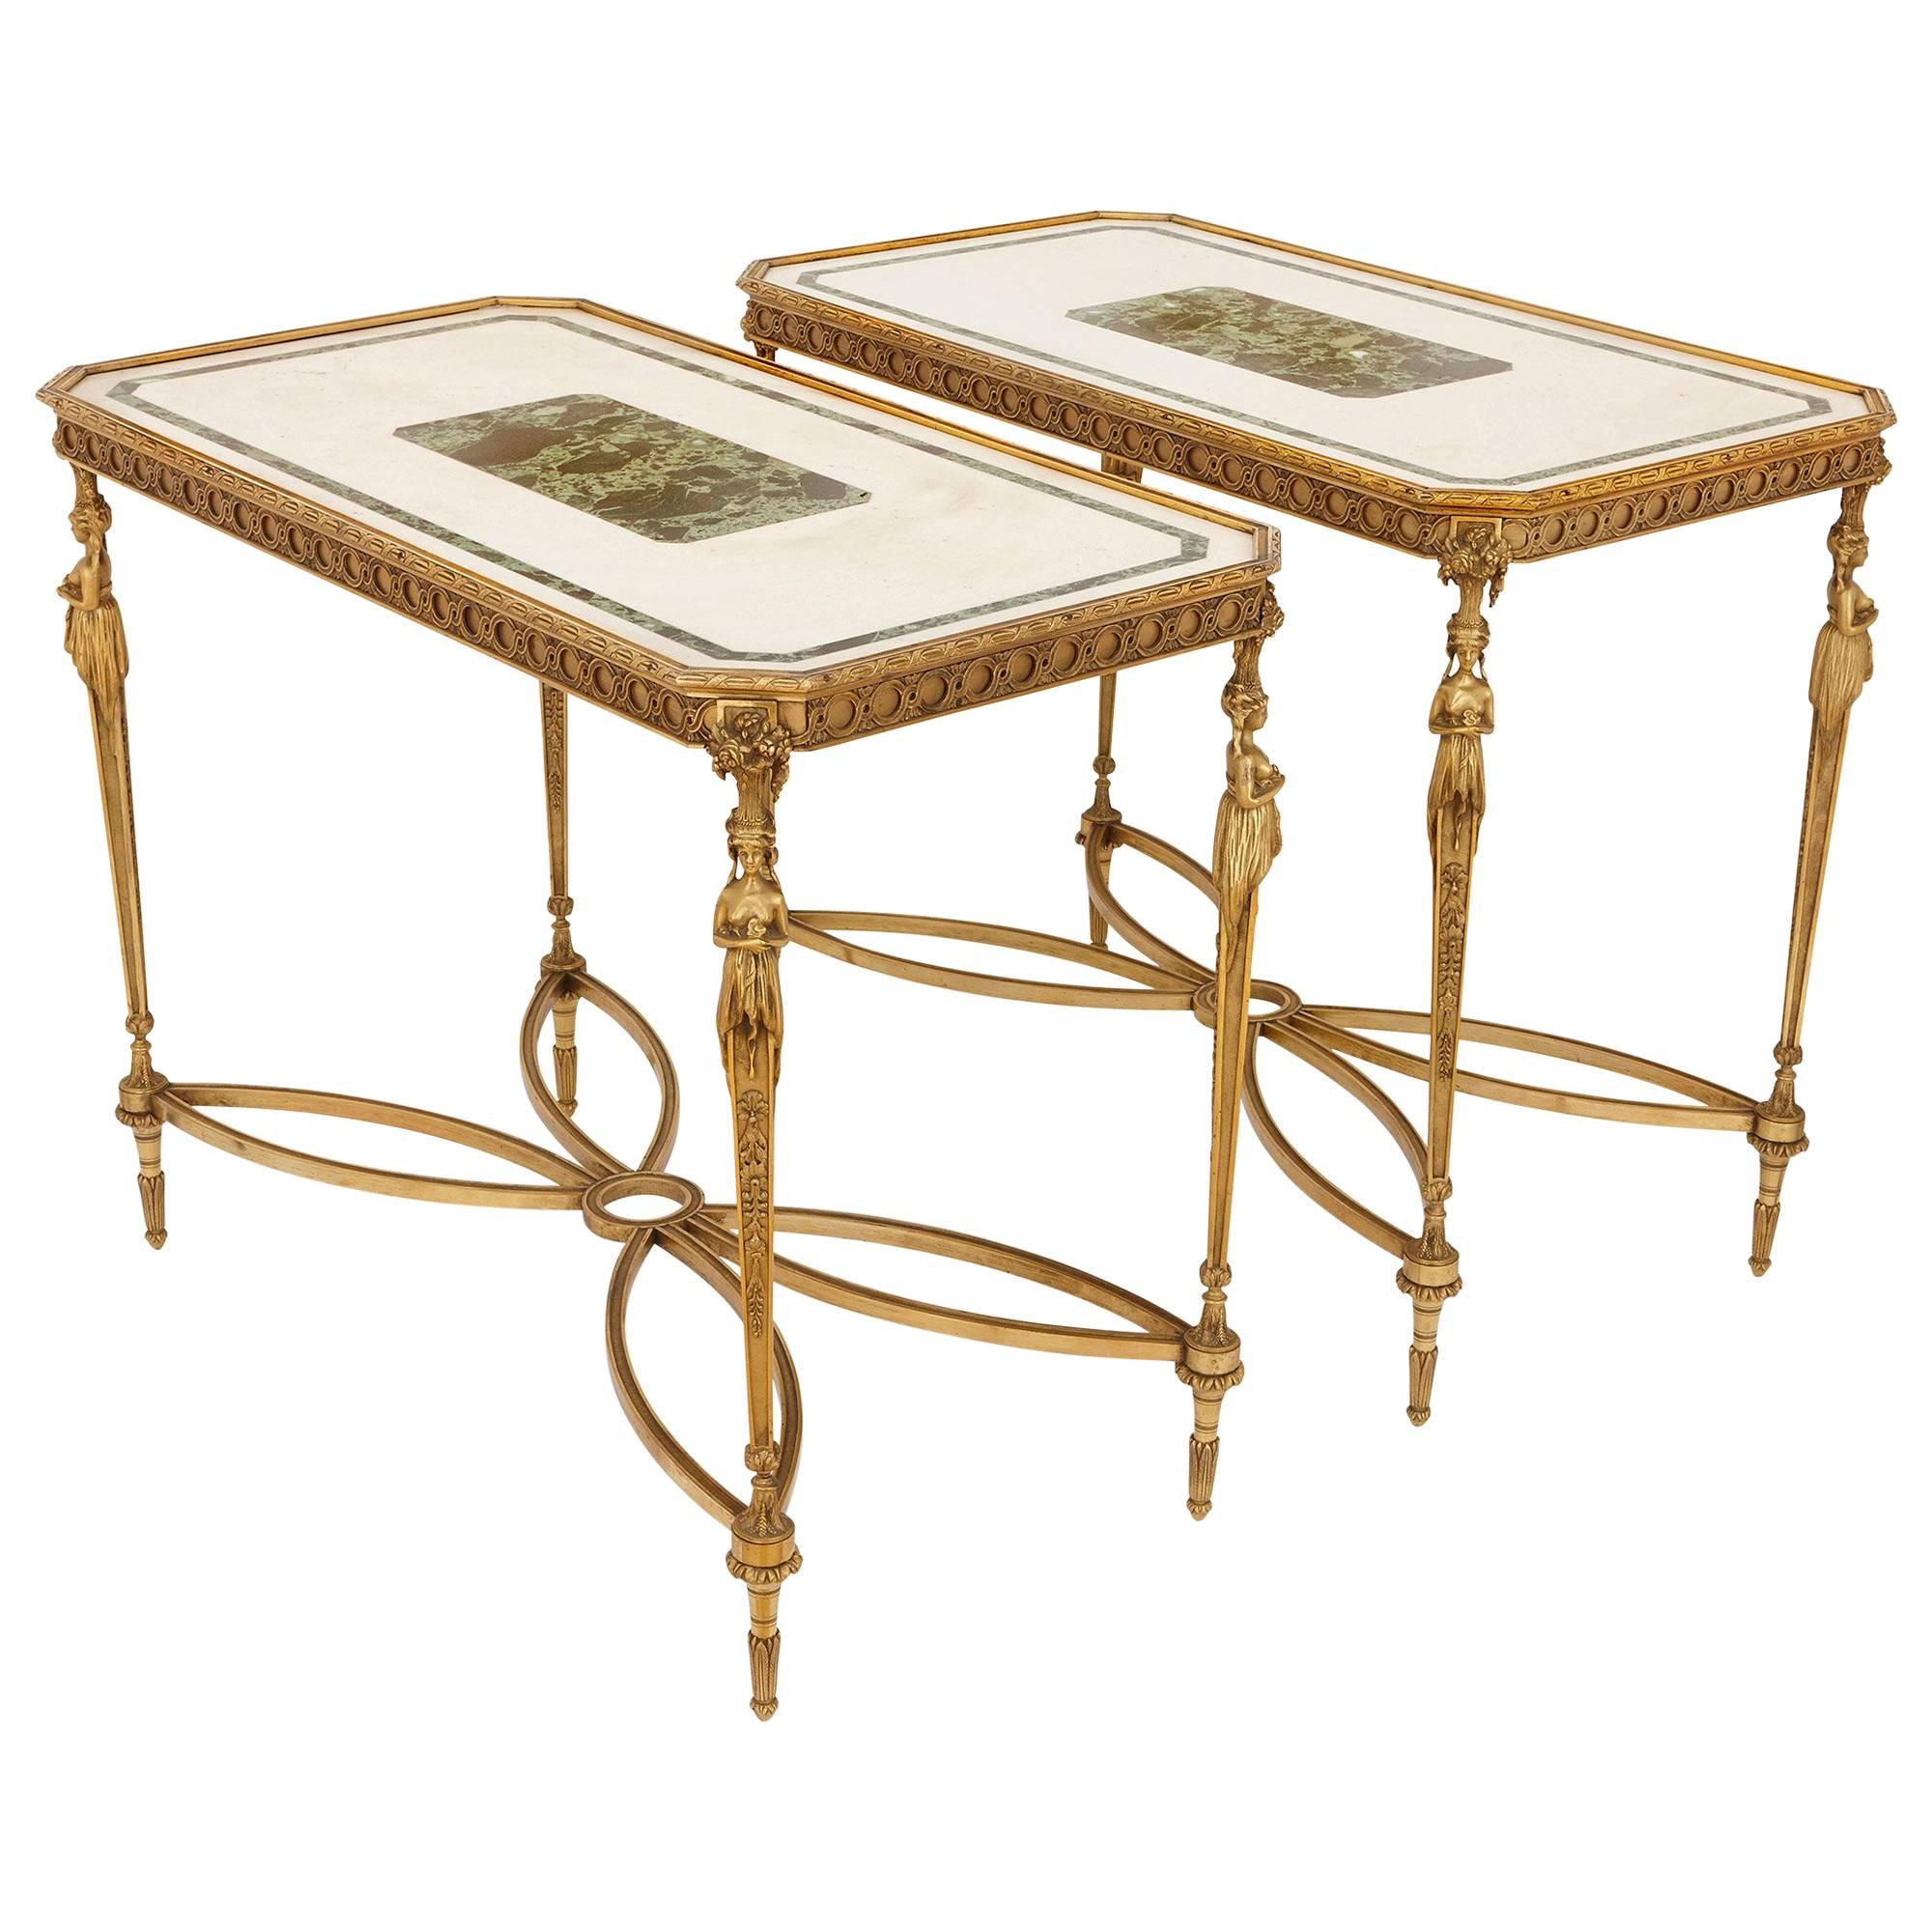 Pair of Gilt Bronze-Mounted Neoclassical Style Centre Tables with Marble Tops